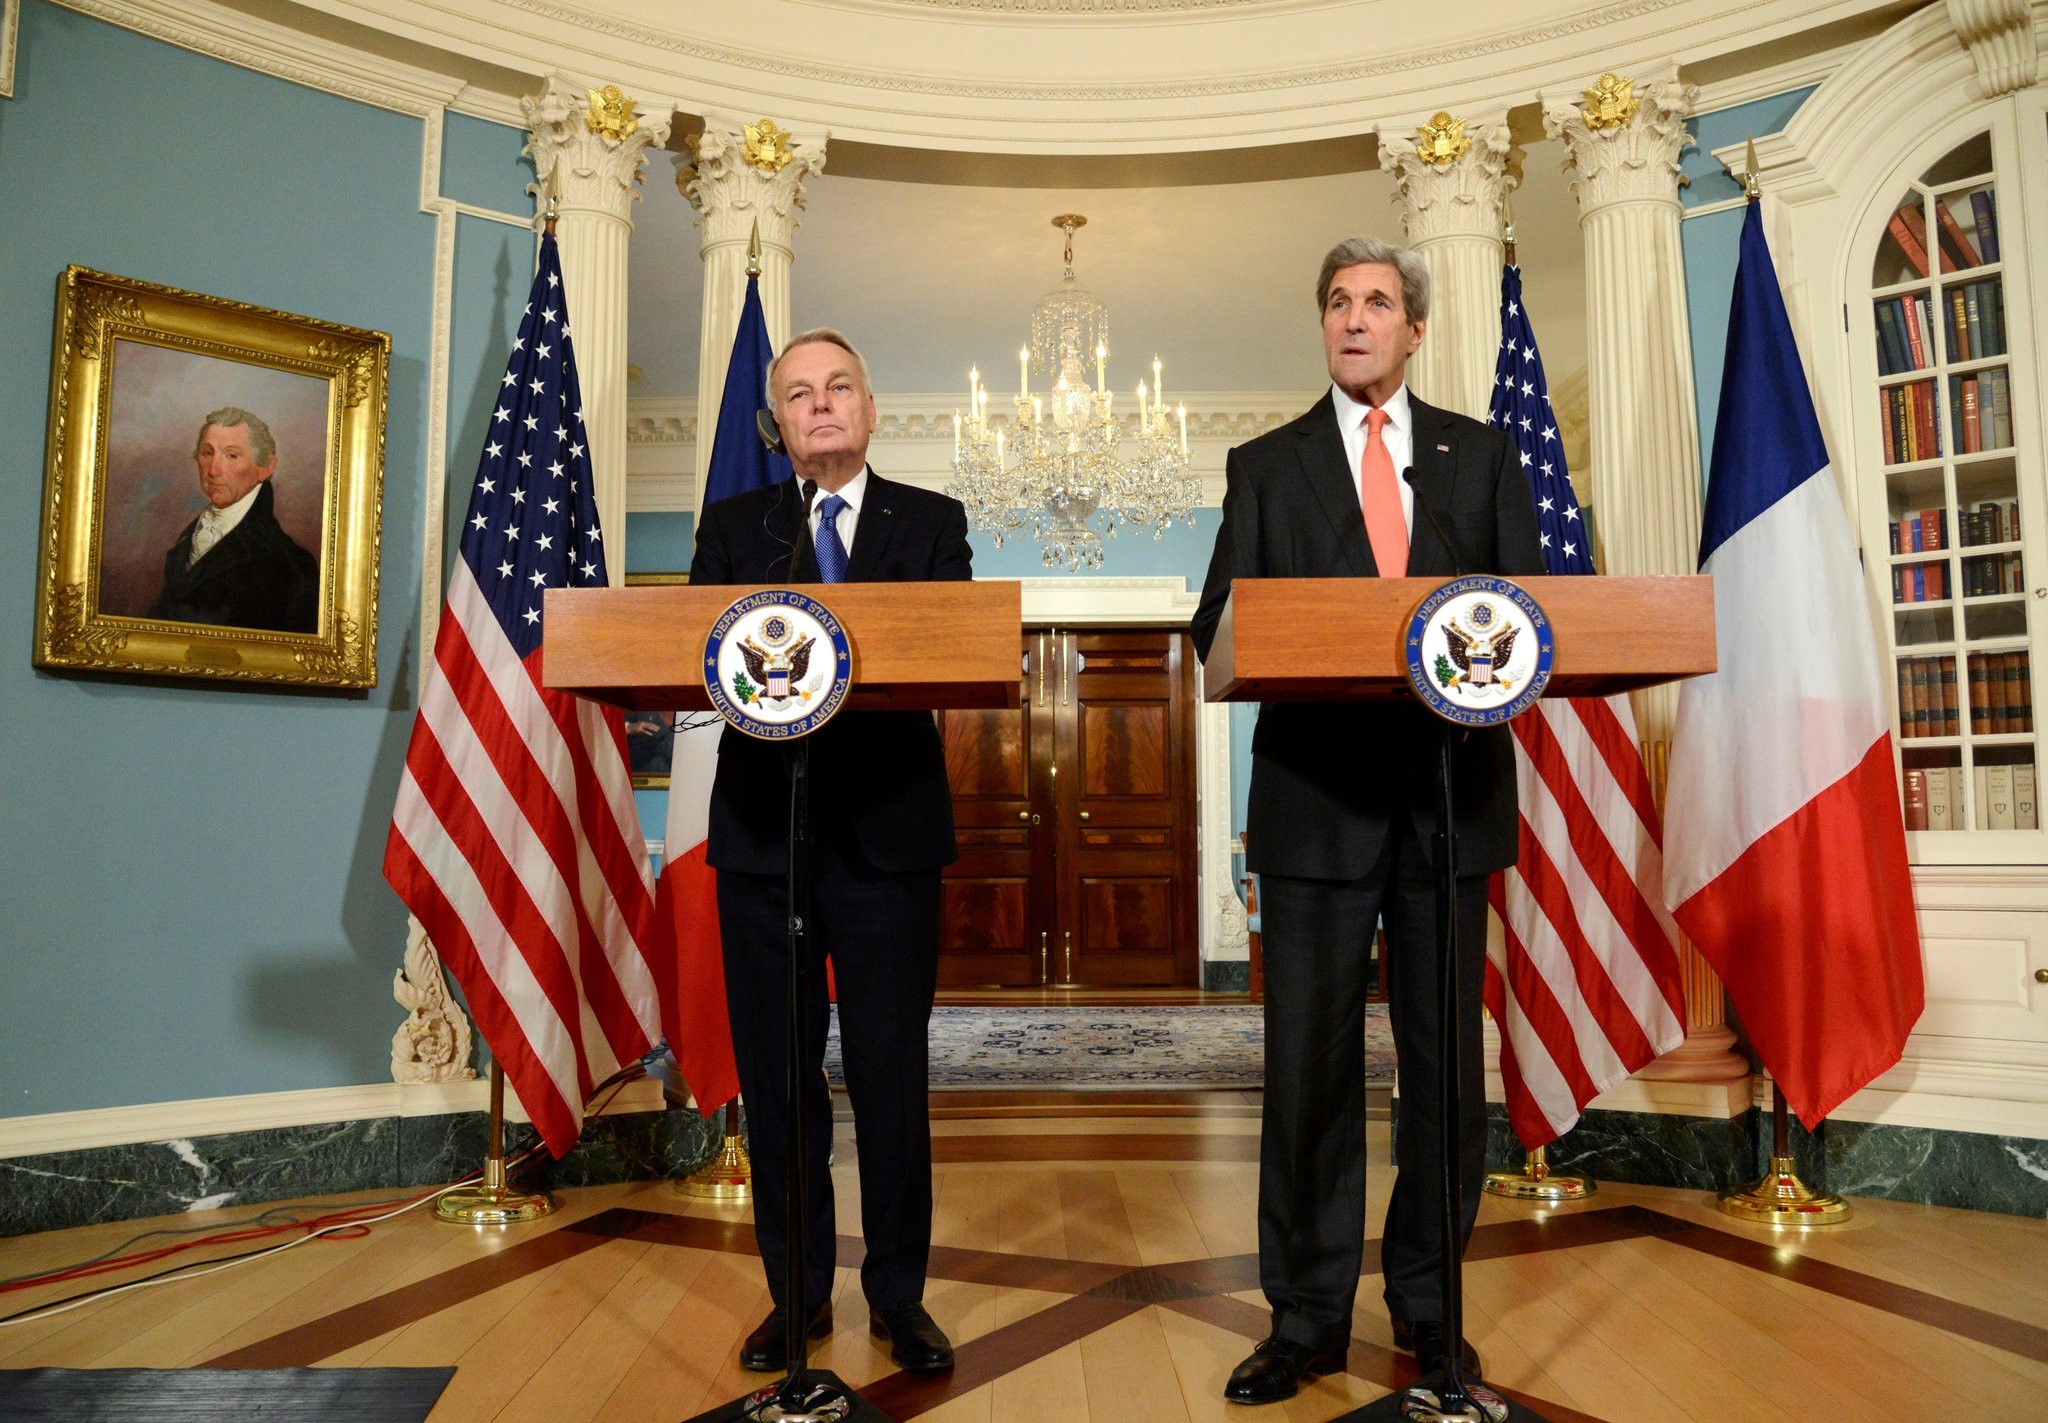 U.S. Secretary of State John Kerry (R) makes a statement with French Foreign Minister Jean-Marc Ayrault. (Reuters Photo)